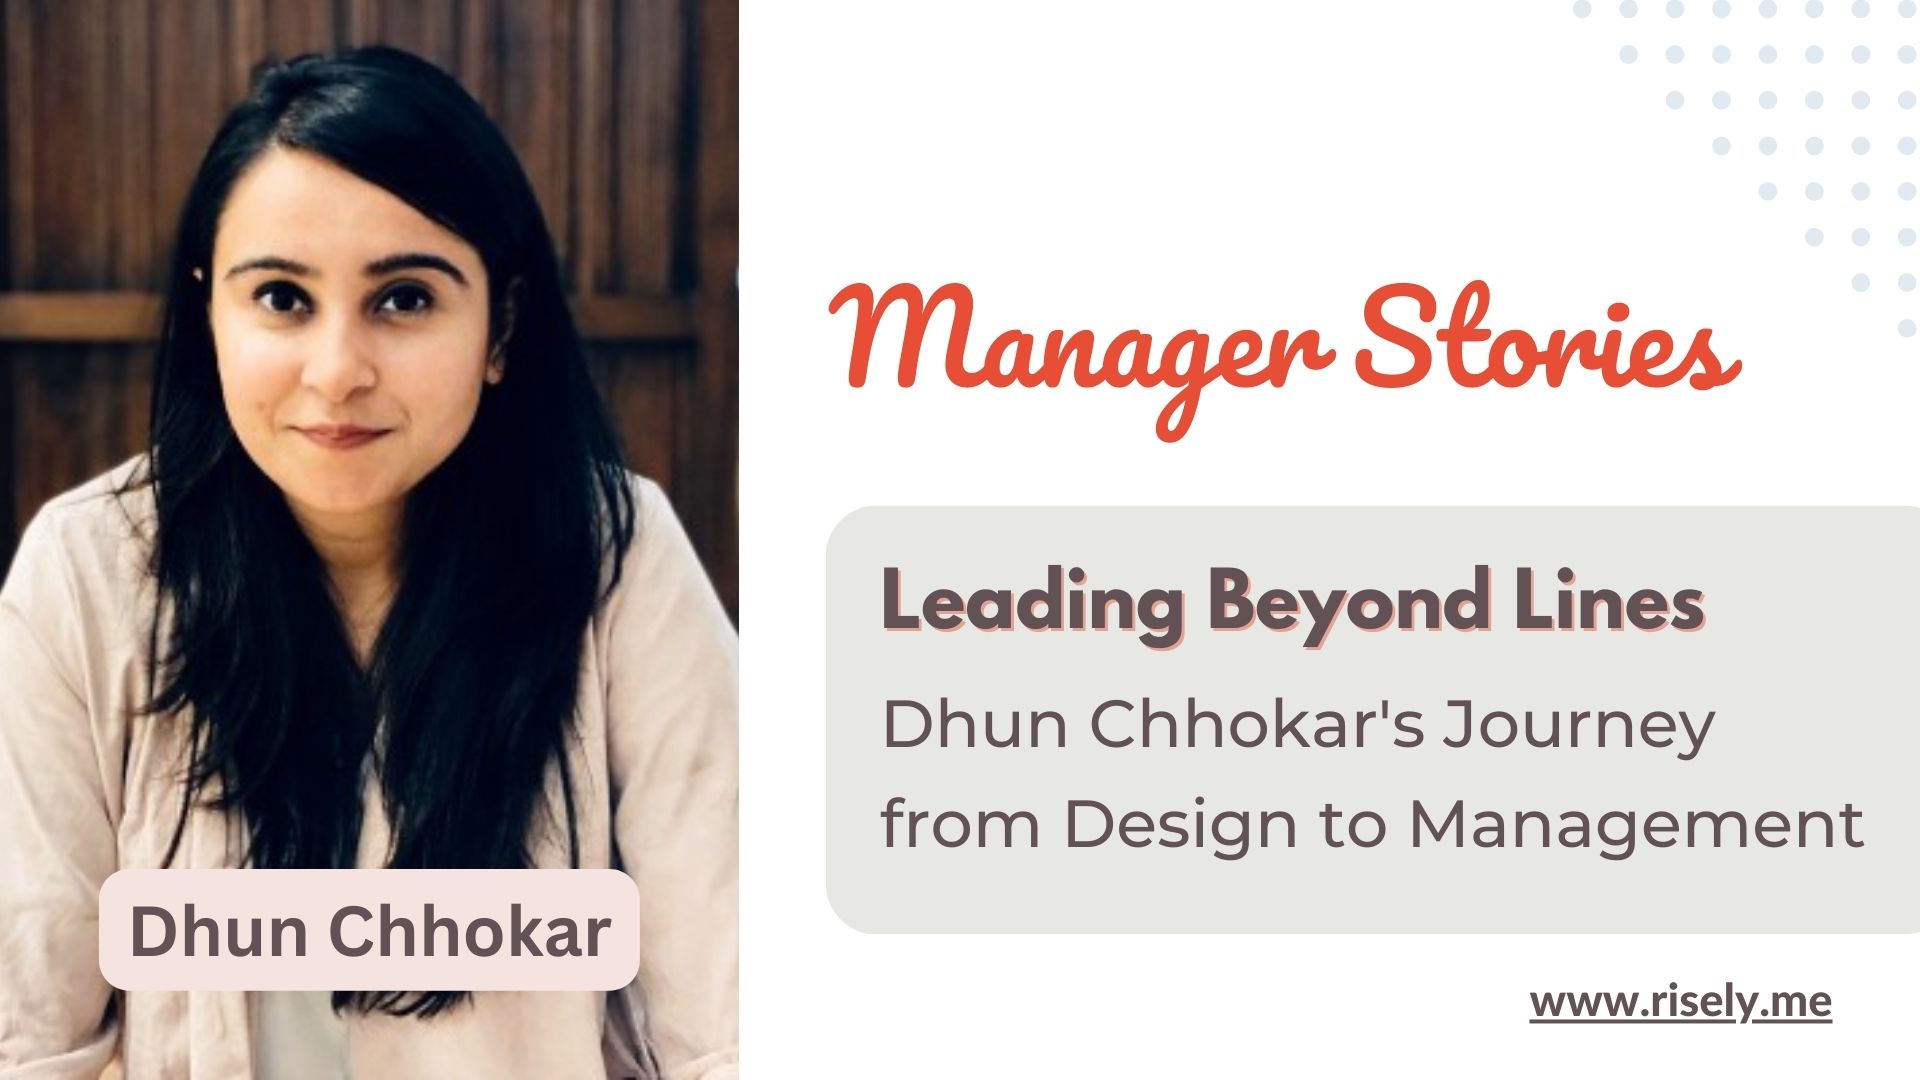 Leading Beyond Lines: Dhun Chhokar's Journey from Design to Management